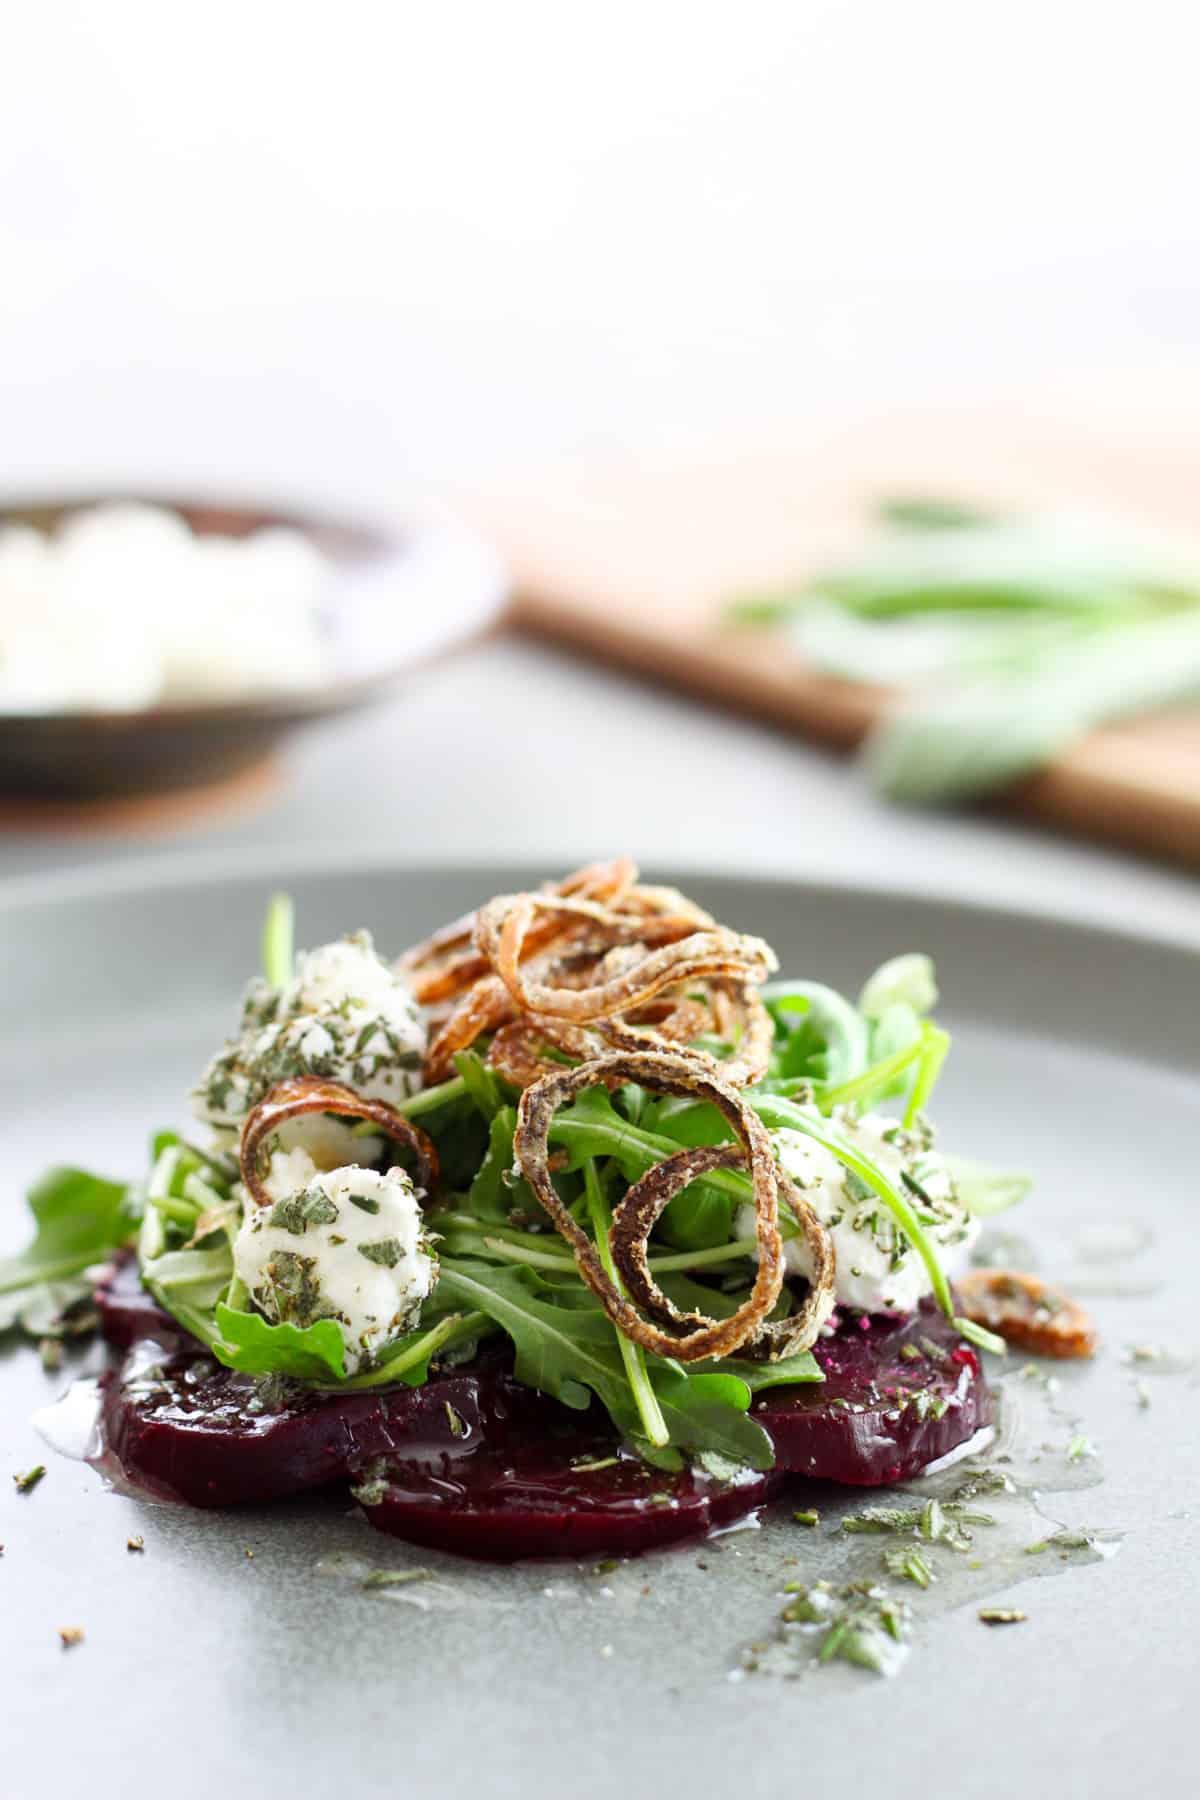 A close up of sliced purple beets topped with arugula, goat cheese rolled in fresh herbs, and topped with crispy fried shallots all on a gray plate. Out of focus in the background is more goat cheese on a small bowl and herbs on a cutting board.